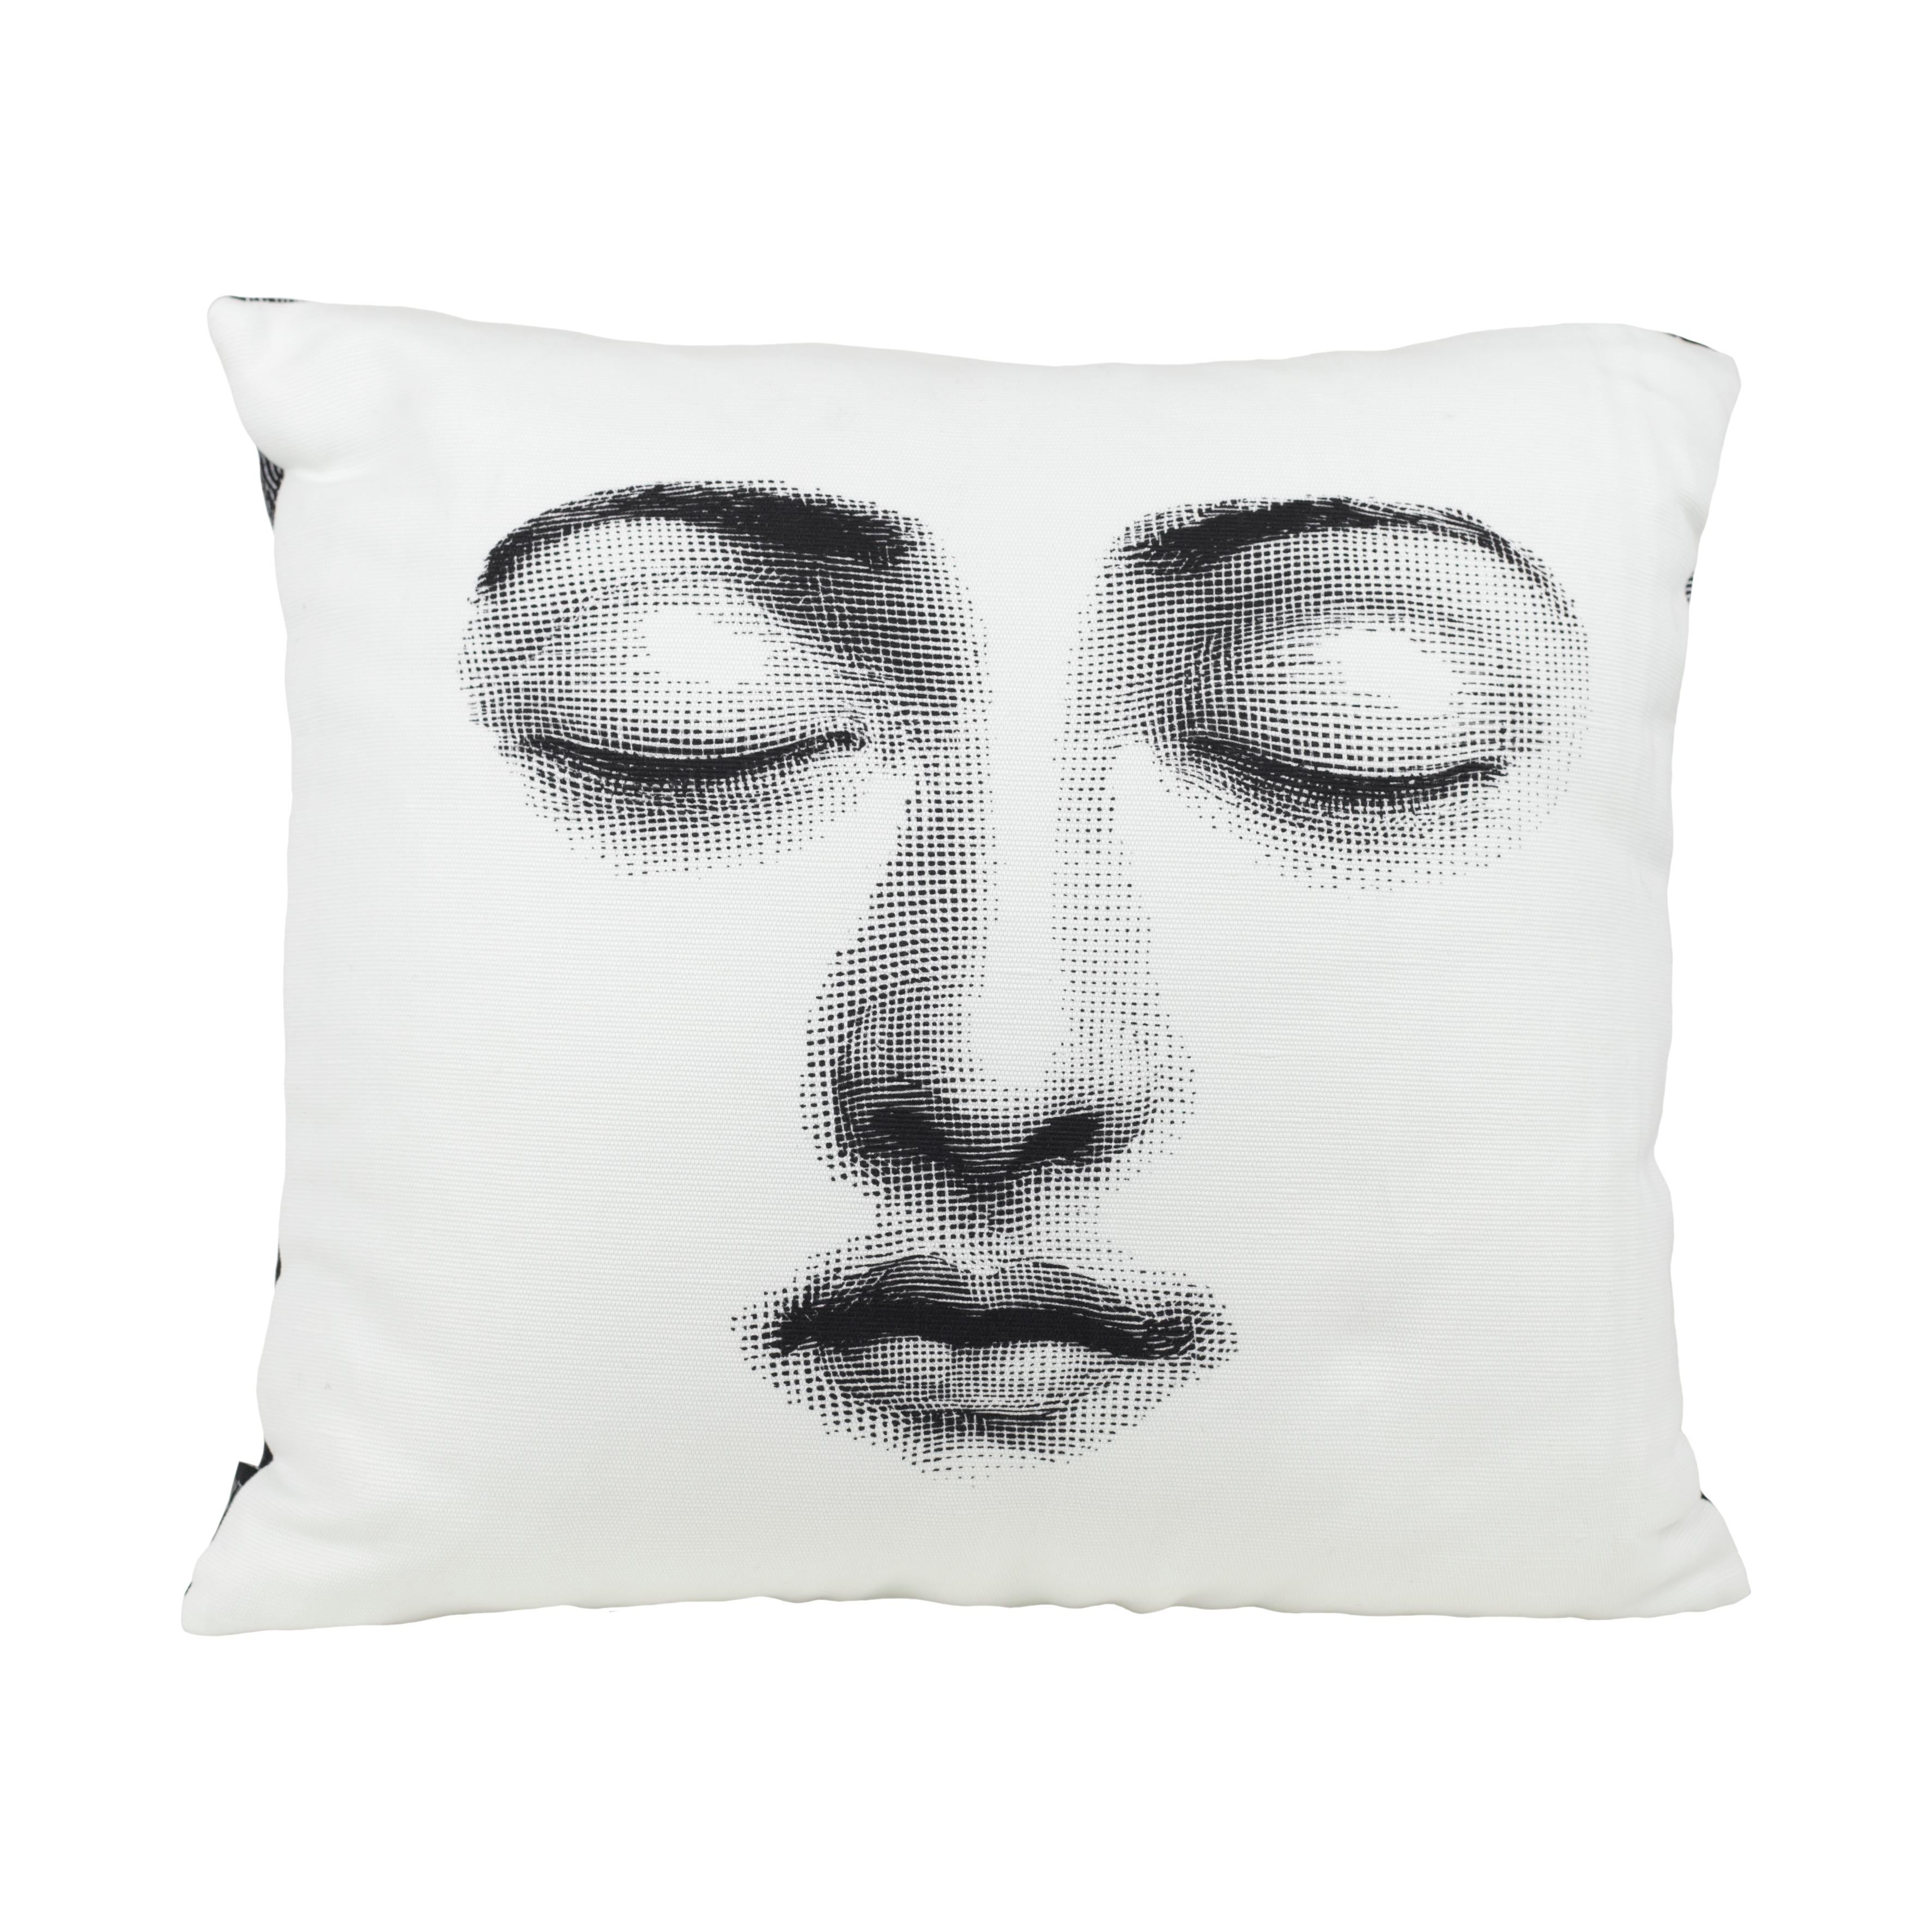 The Fornasetti cushions will add to each room an unexpected detail thanks to the most iconic Italian atelier designs. 

The decoration features two variations from the famous Fornasetti series Tema e Variazioni, inspired by the face of the